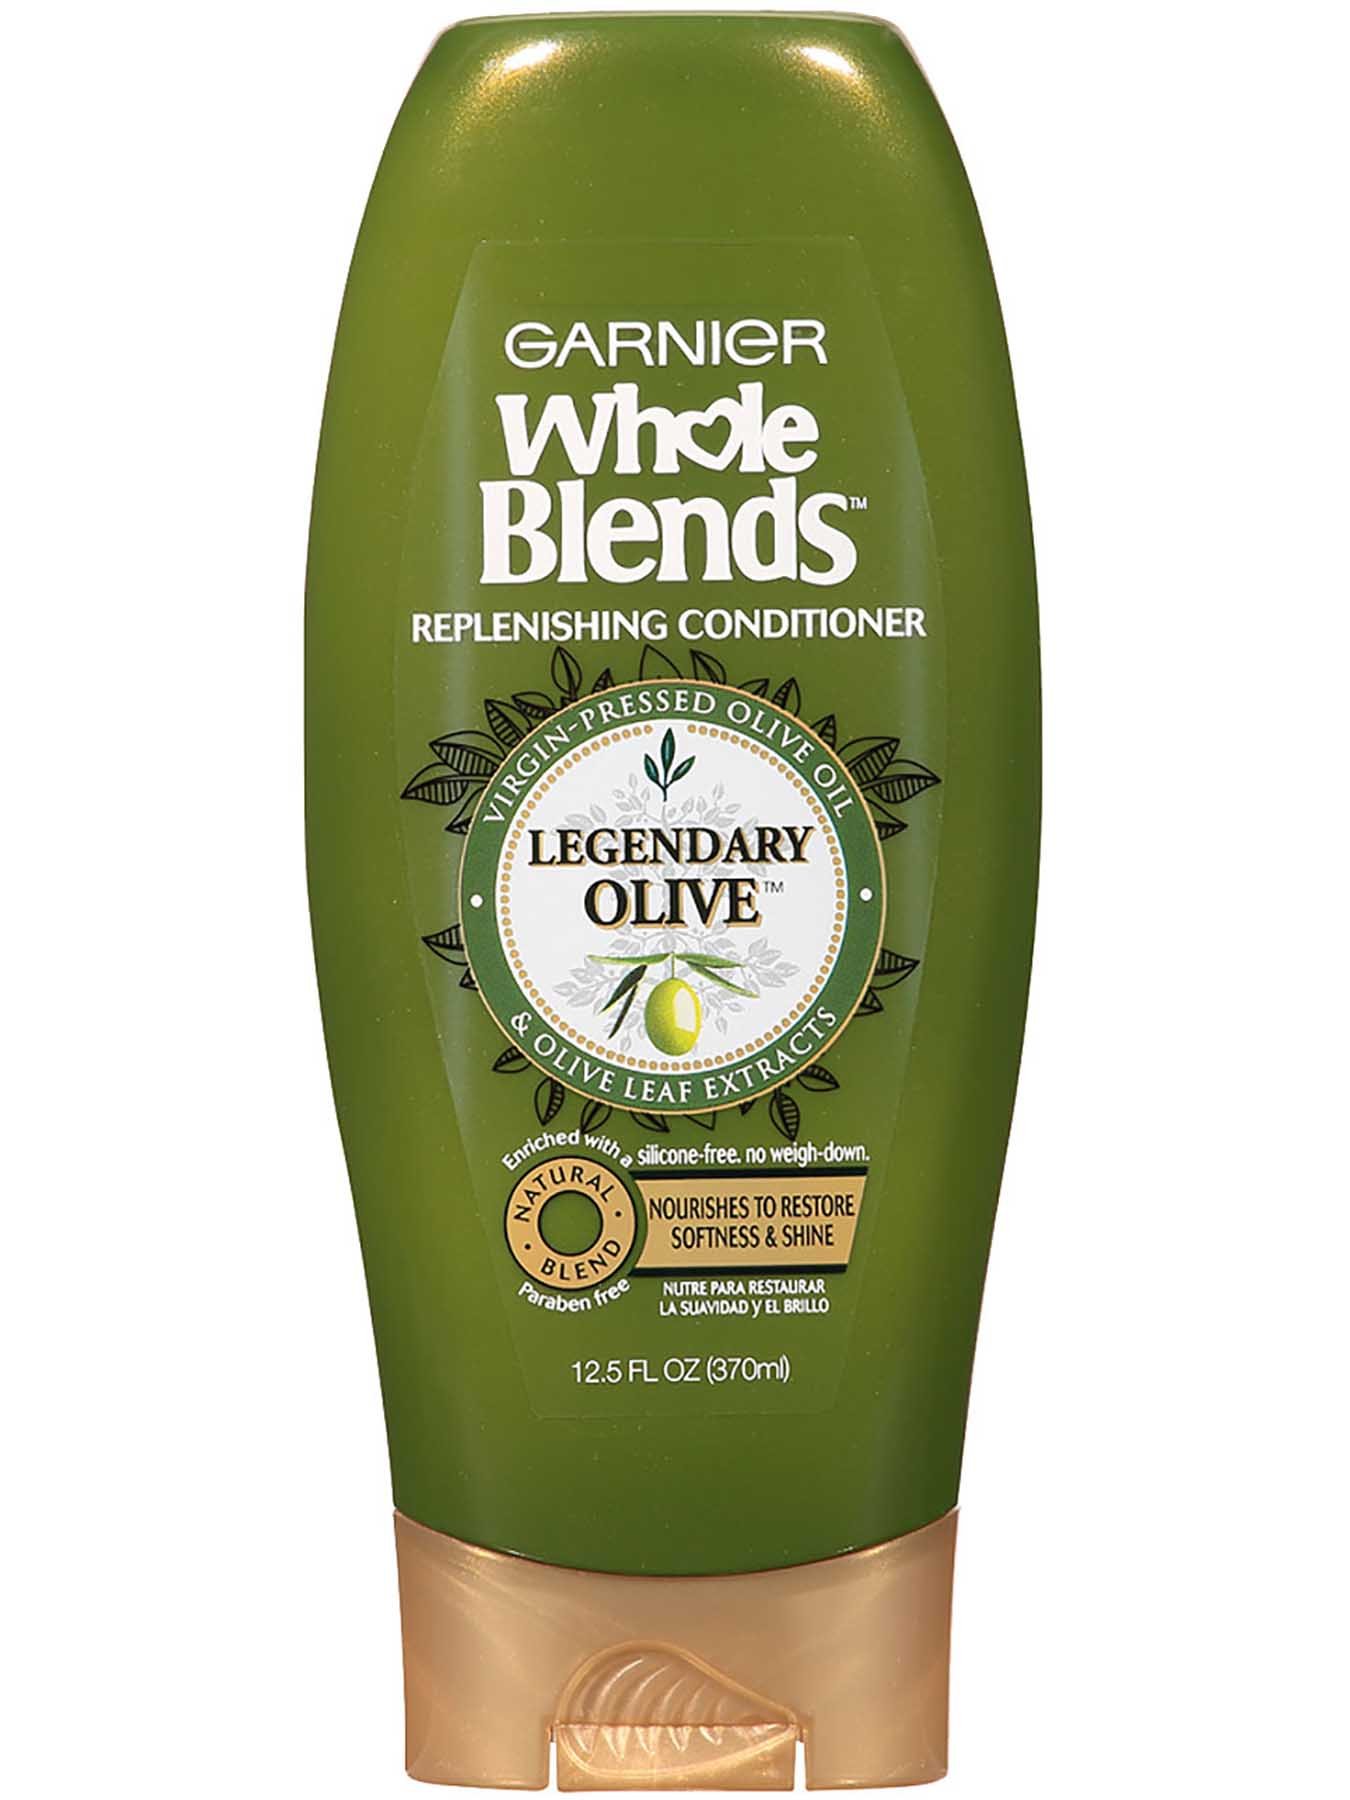 Front view of Replenishing Conditioner with Legendary Virgin-Pressed Olive Oil and Olive Leaf Extracts.